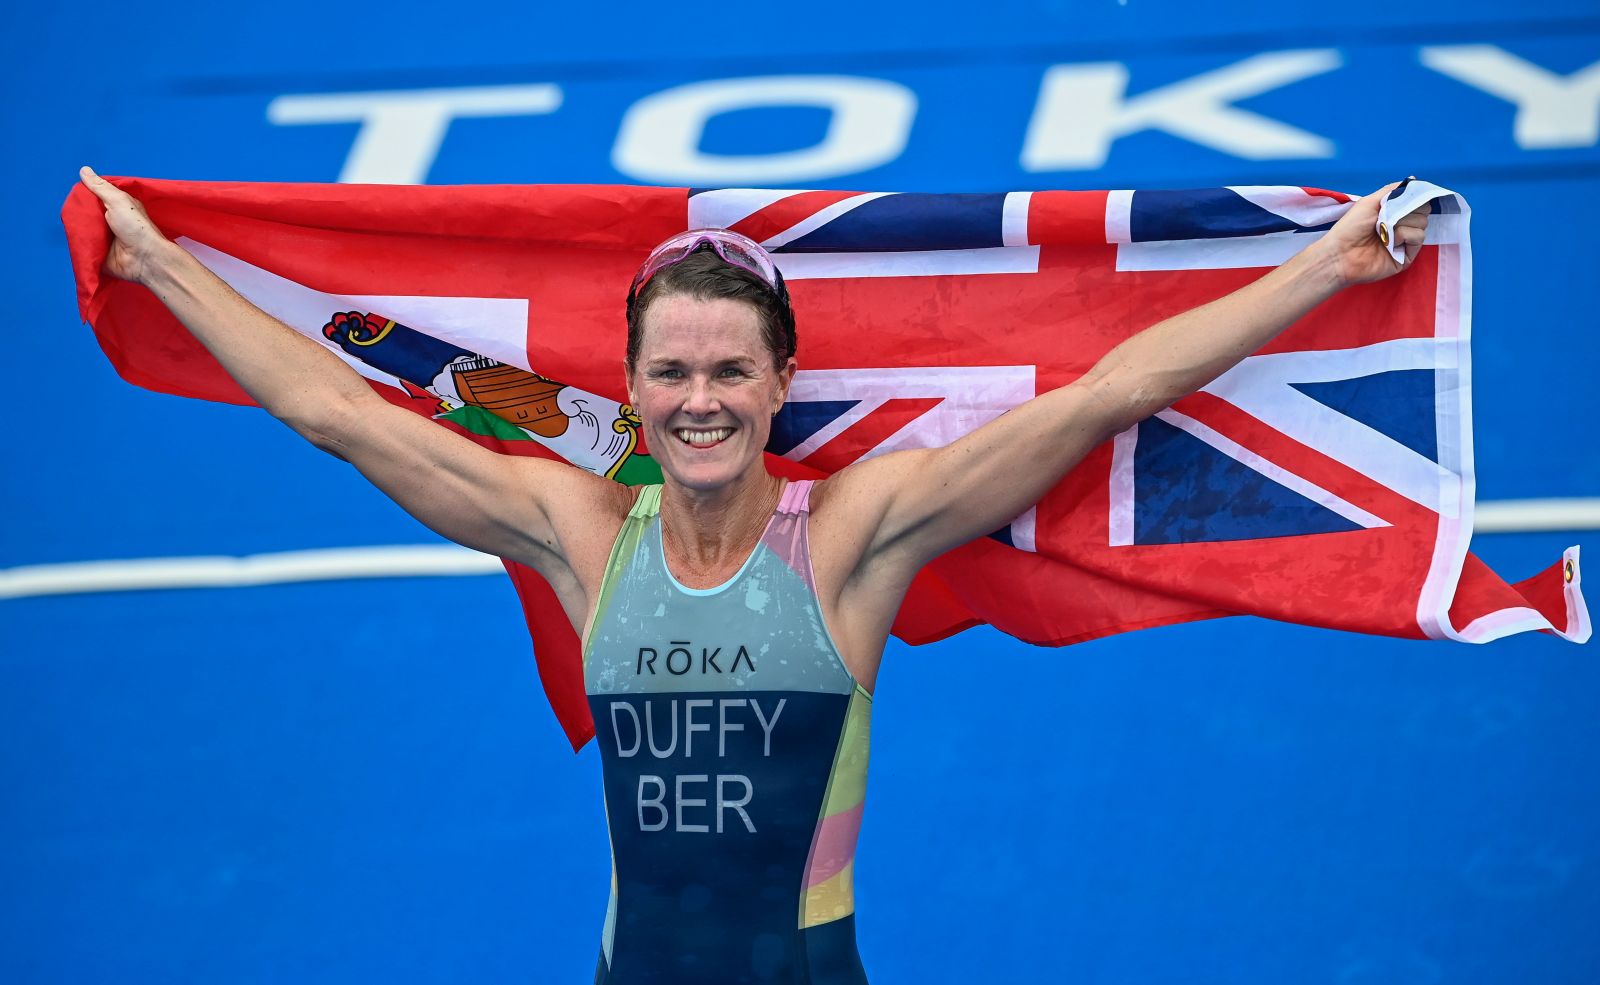 epa09368497 Flora Duffy of the Bermudas celebrates after she won the women's individual triathlon race of the Tokyo 2020 Olympic Games at the Odaiba Marine Park in Tokyo, Japan, 27 July 2021.  EPA/Zsolt Czegledi HUNGARY OUT